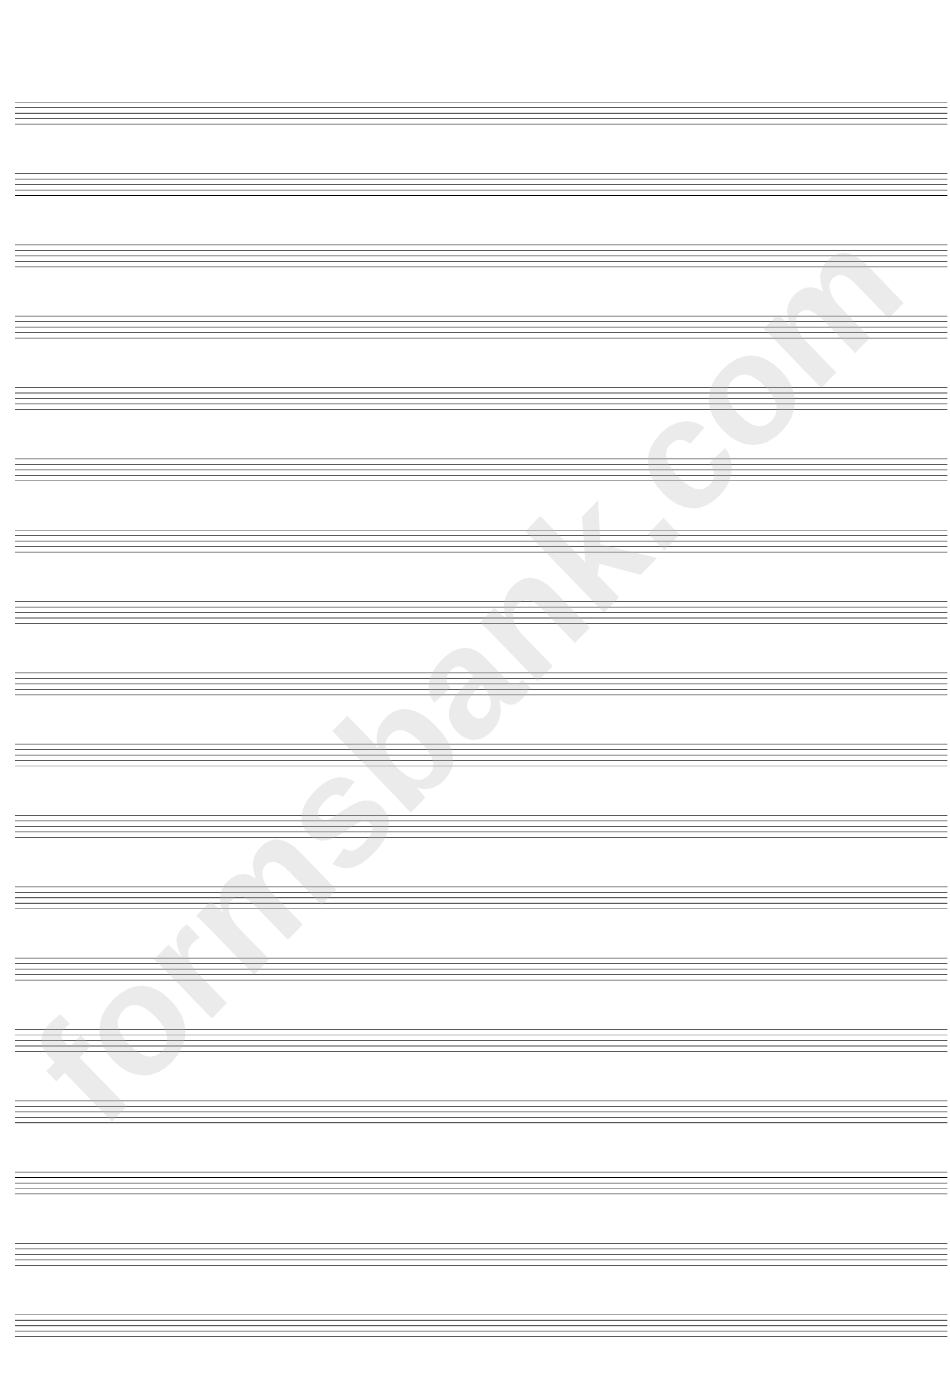 18-Stave With No Clef To One Page (A3) Blank Sheet Music